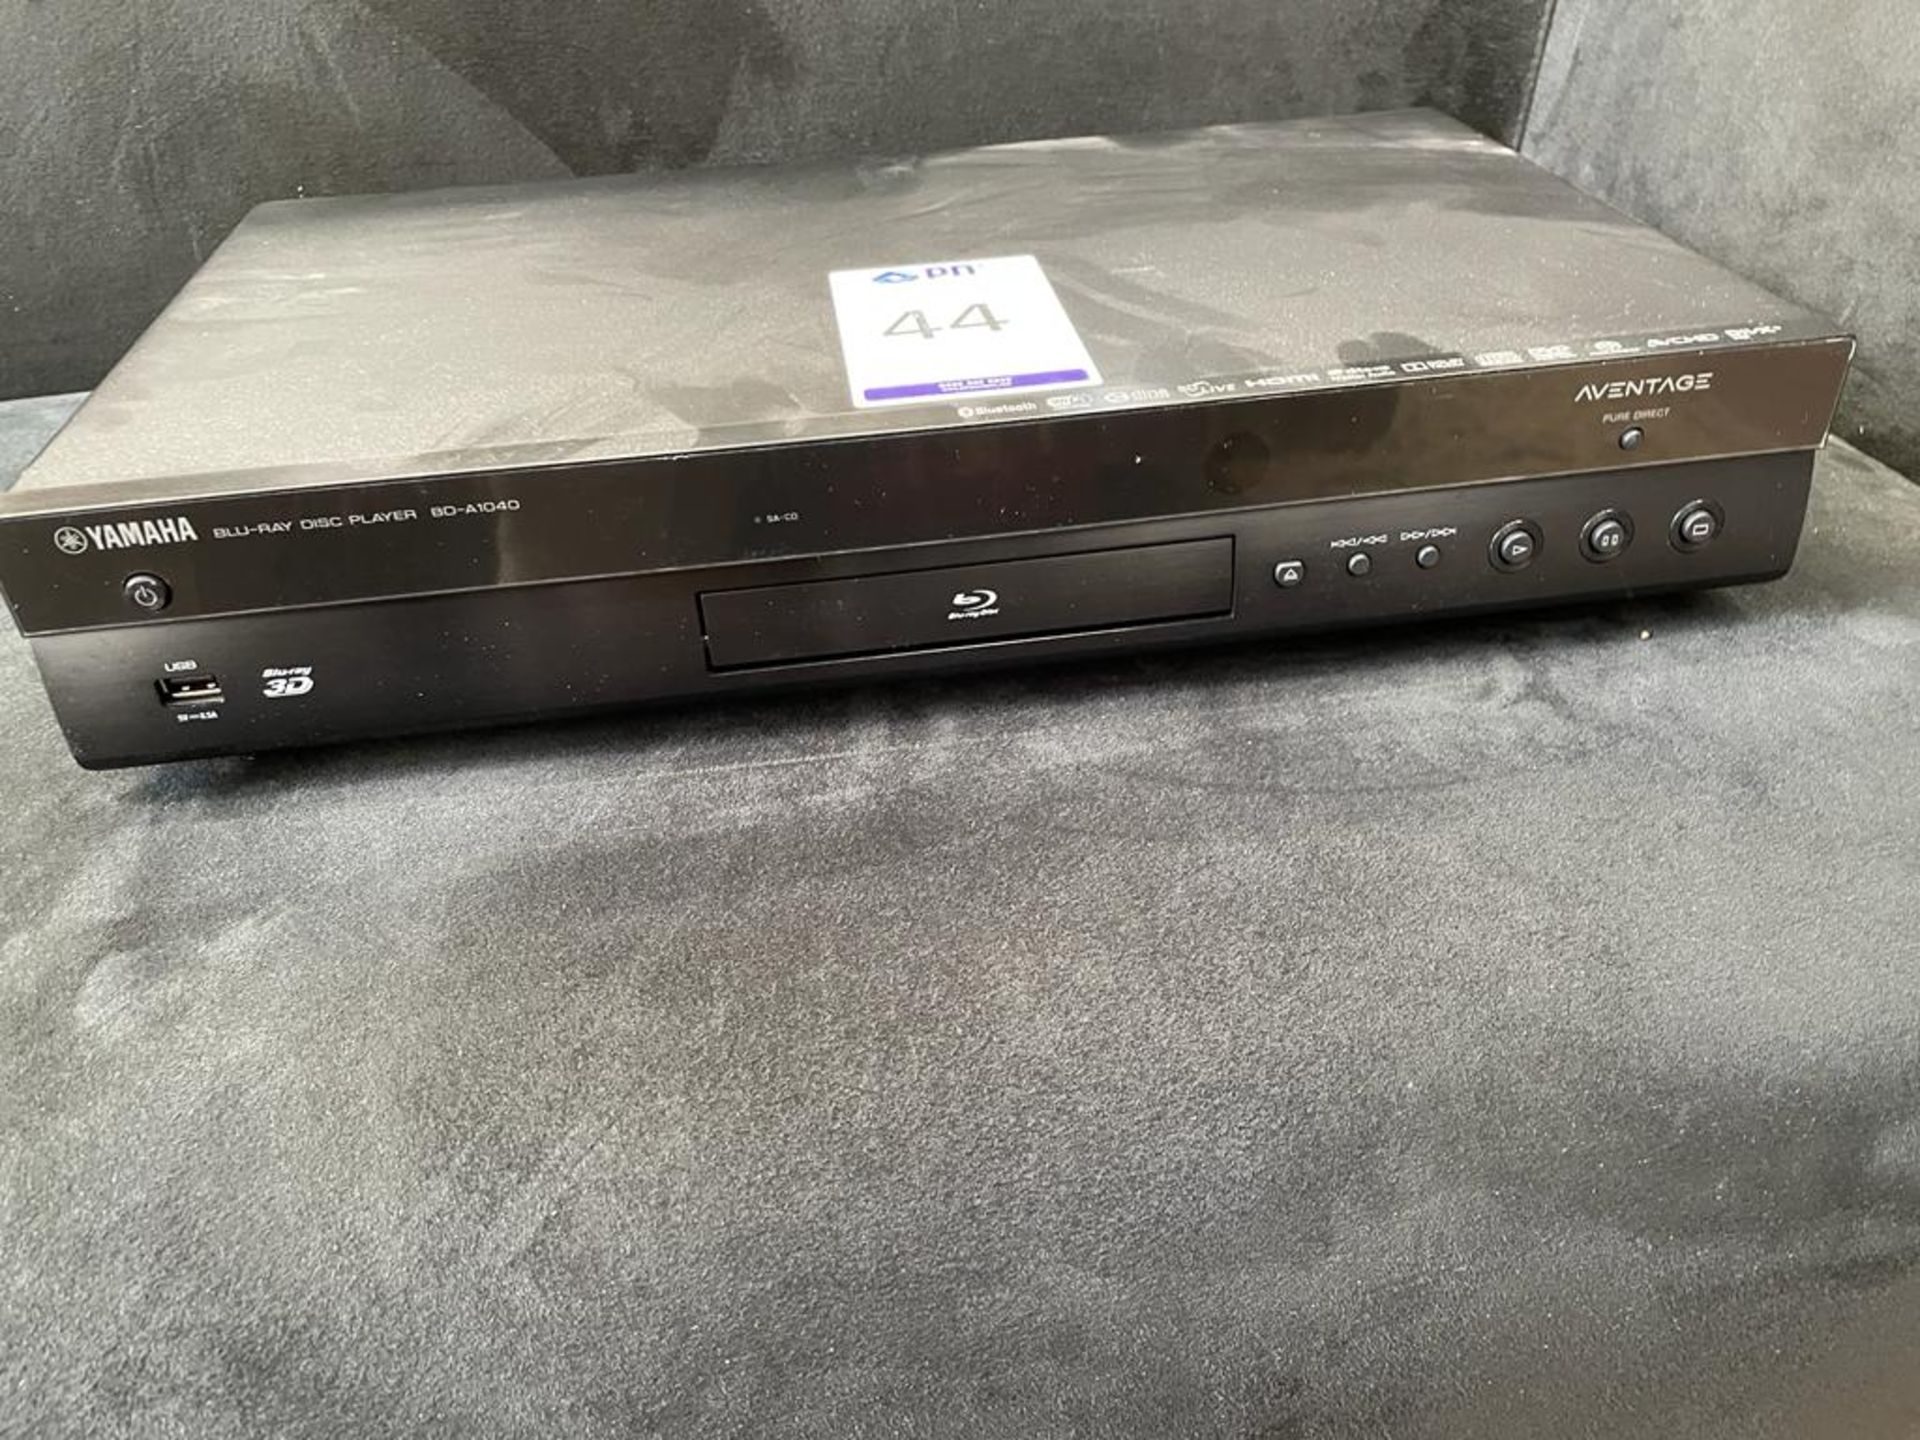 Yamaha BD-A1040 “Aventage” Universal Player, Serial Number Z066874WY (Location: High Wycombe. Please